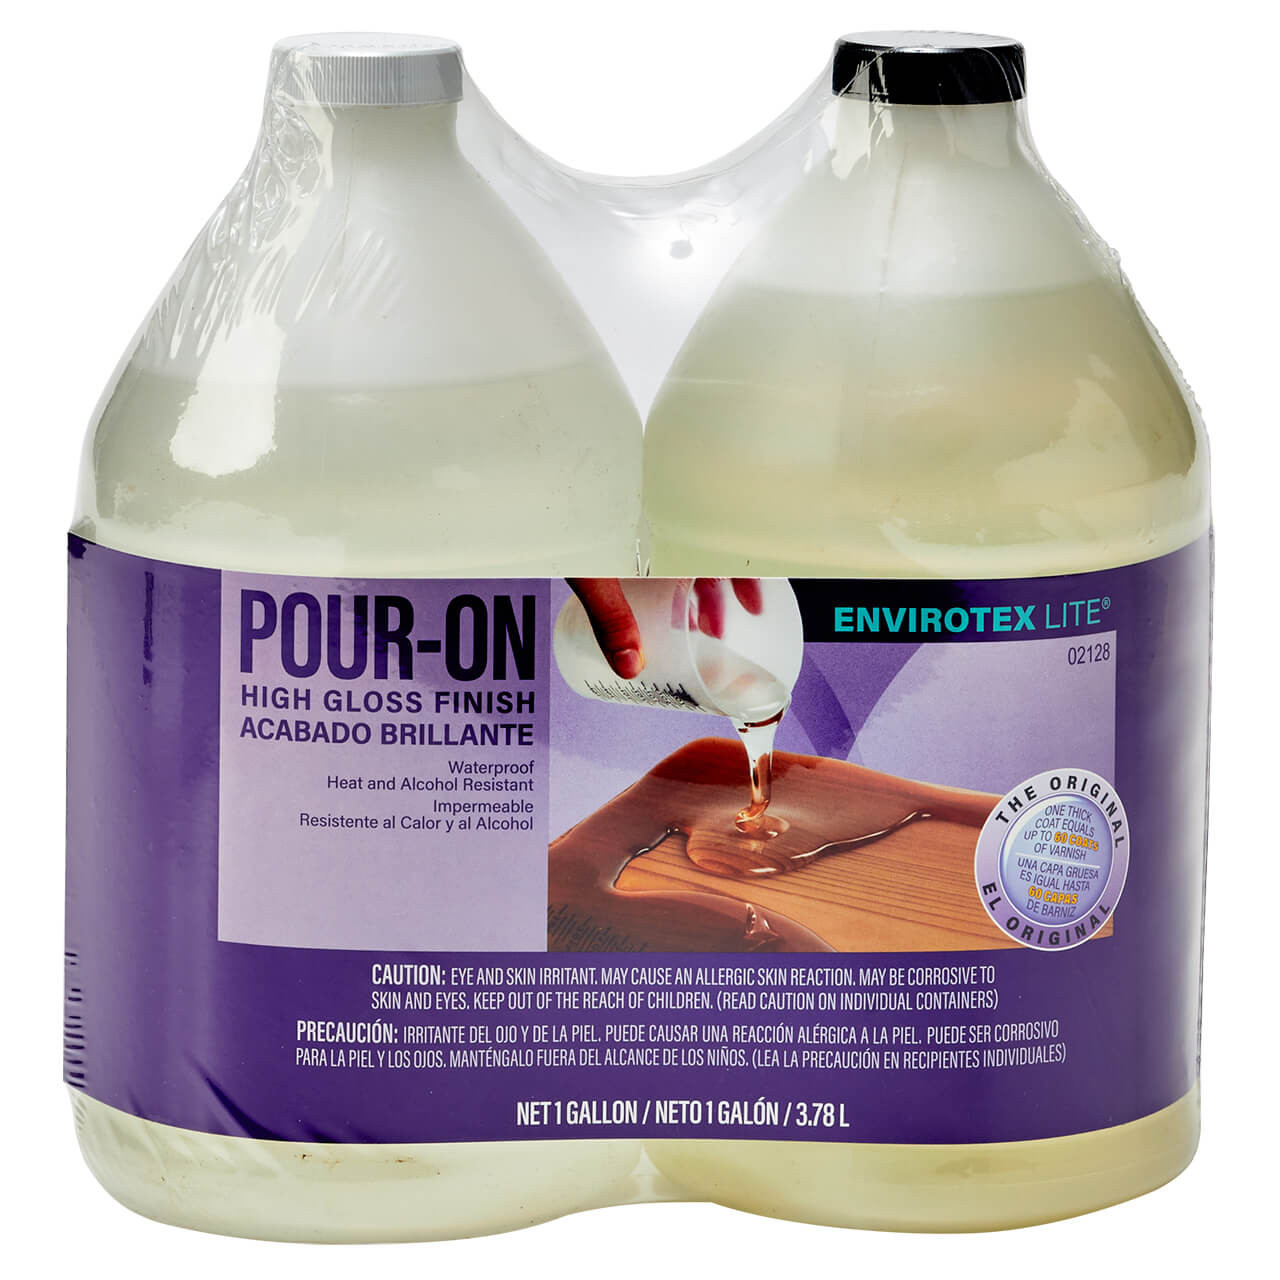 Envirotex Lite Pour-On High Gloss Finish 16oz Preserves Surfaces 4 sq ft.